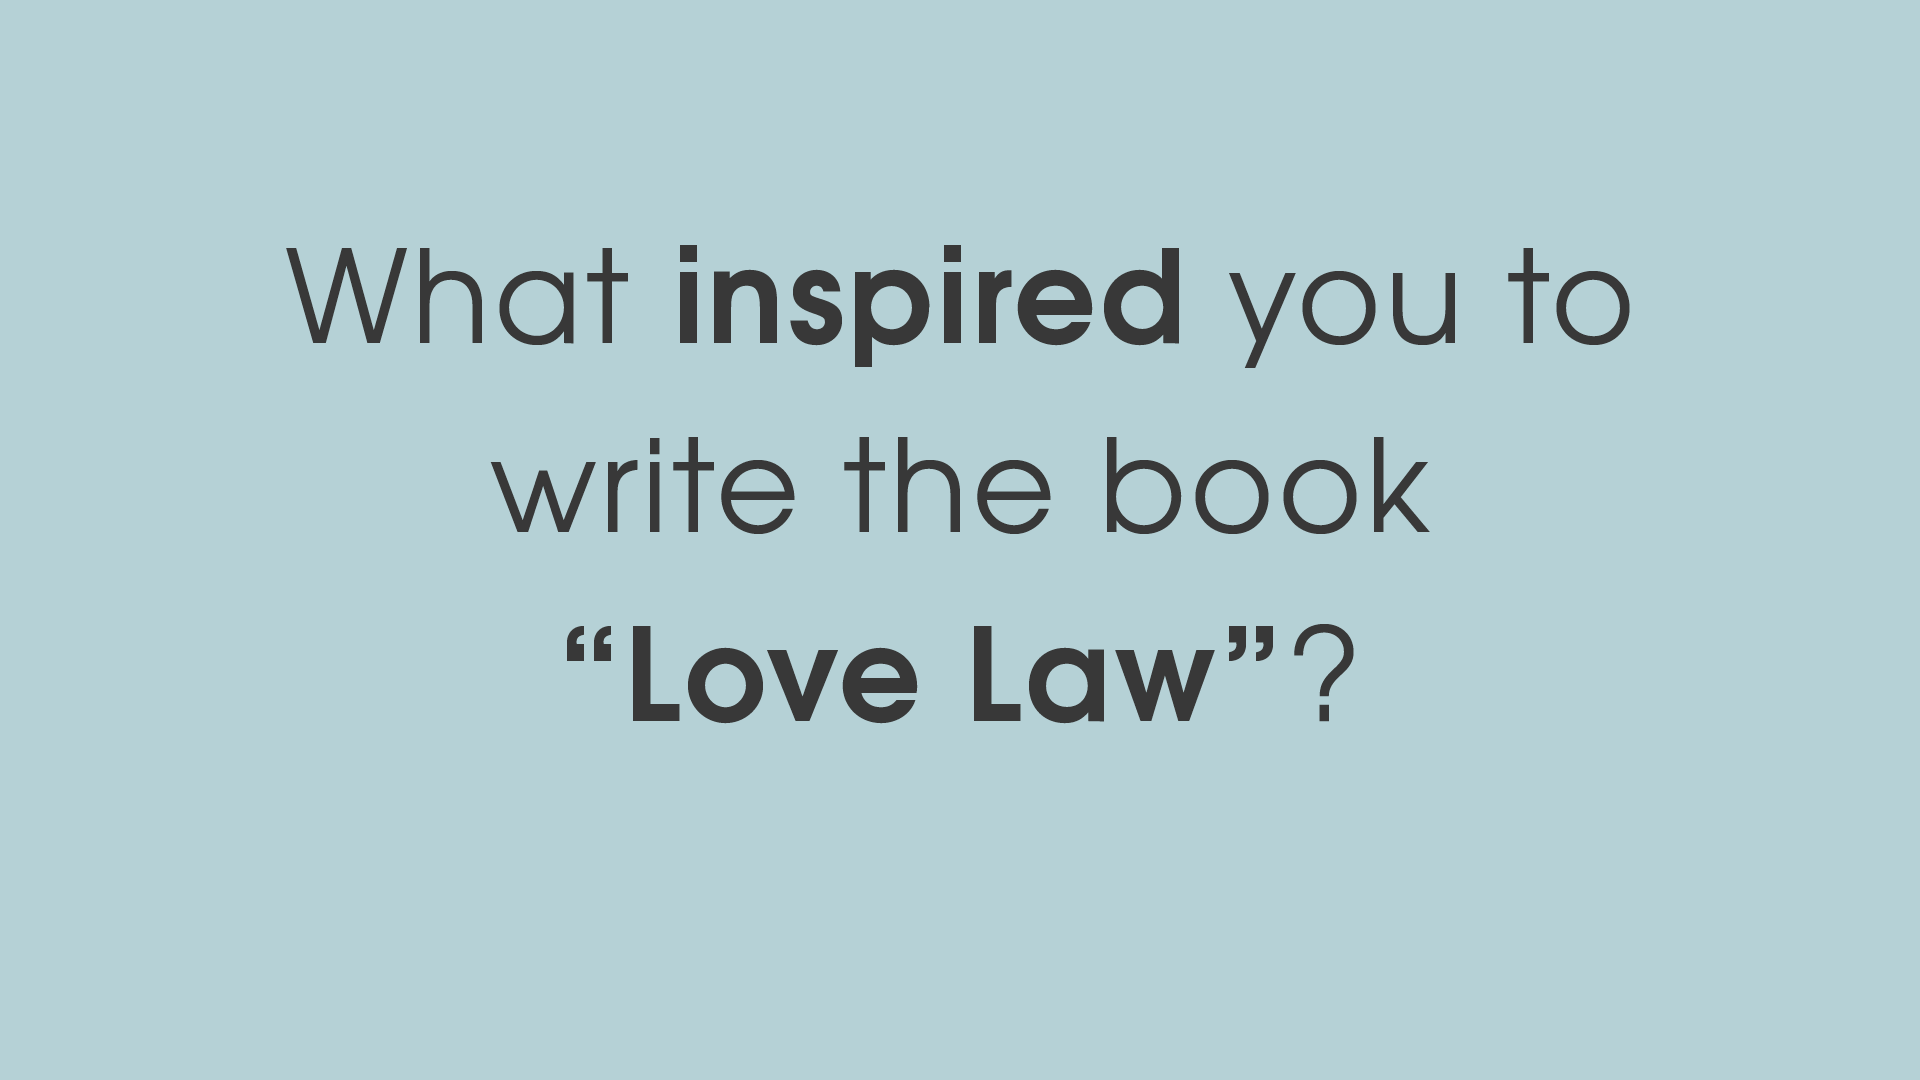 What inspired you to write the book Love Law?